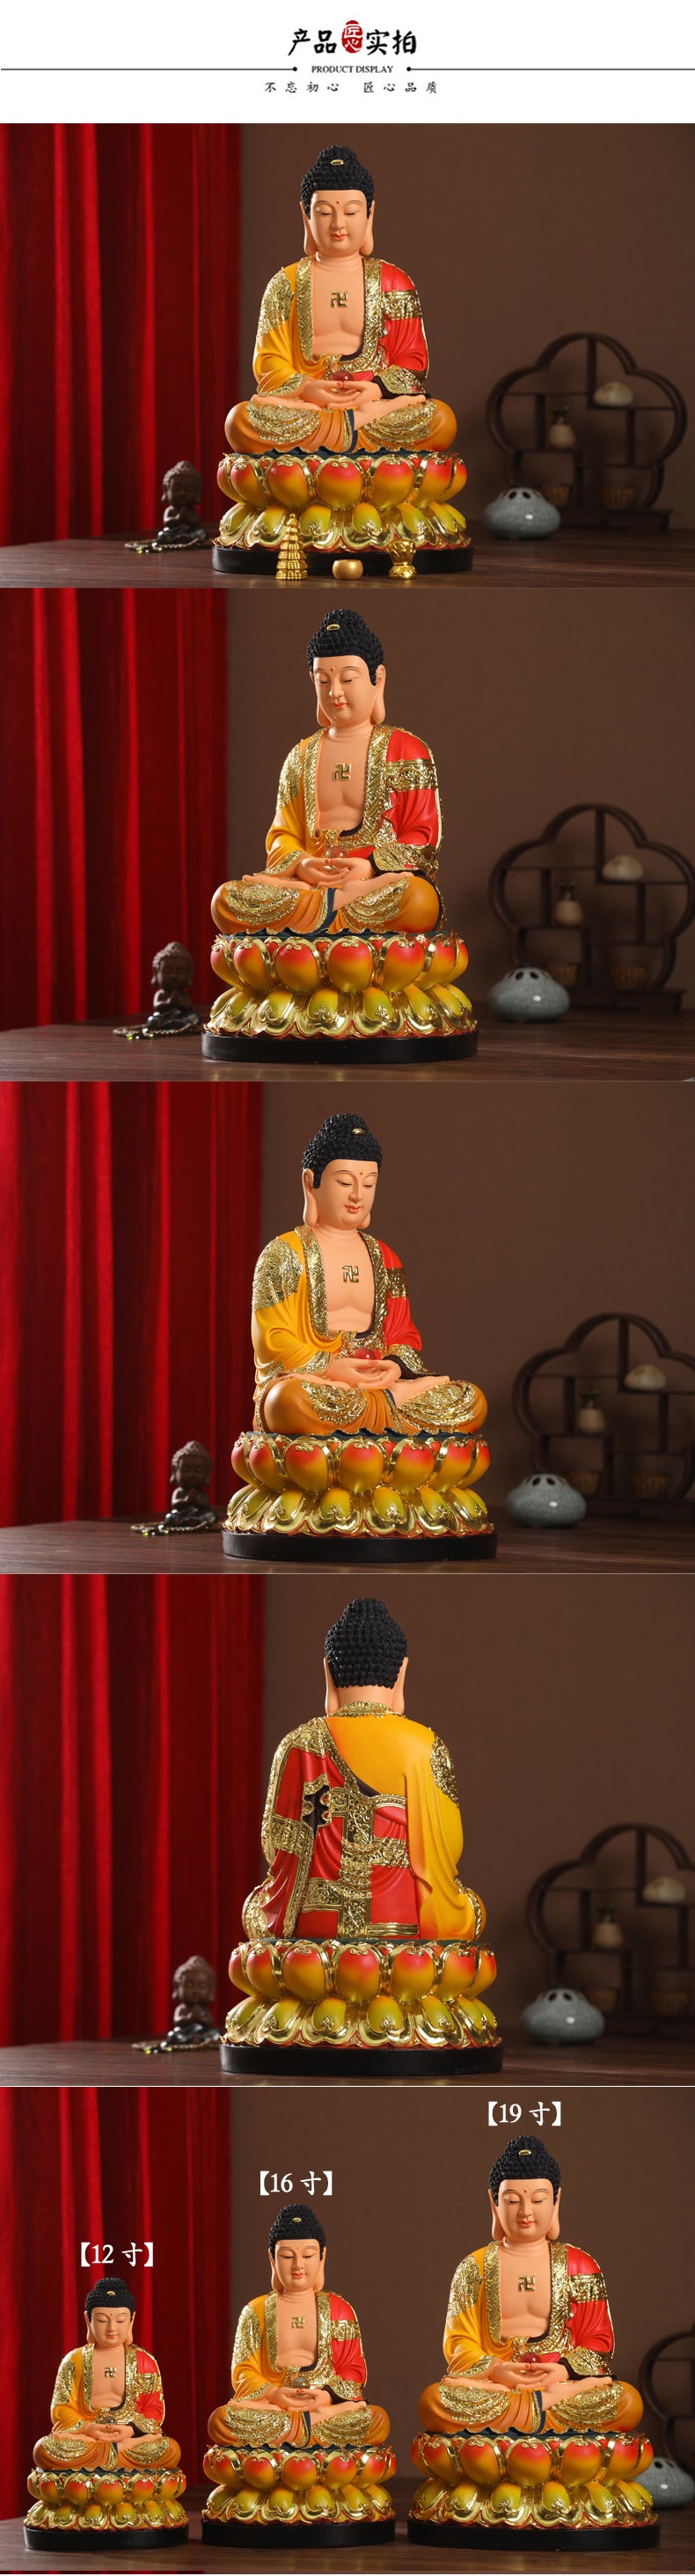 Namo Shakyamuni Buddha Statue for Home, Colorful Resin Material, Offerings Product Details Description Introduction-3